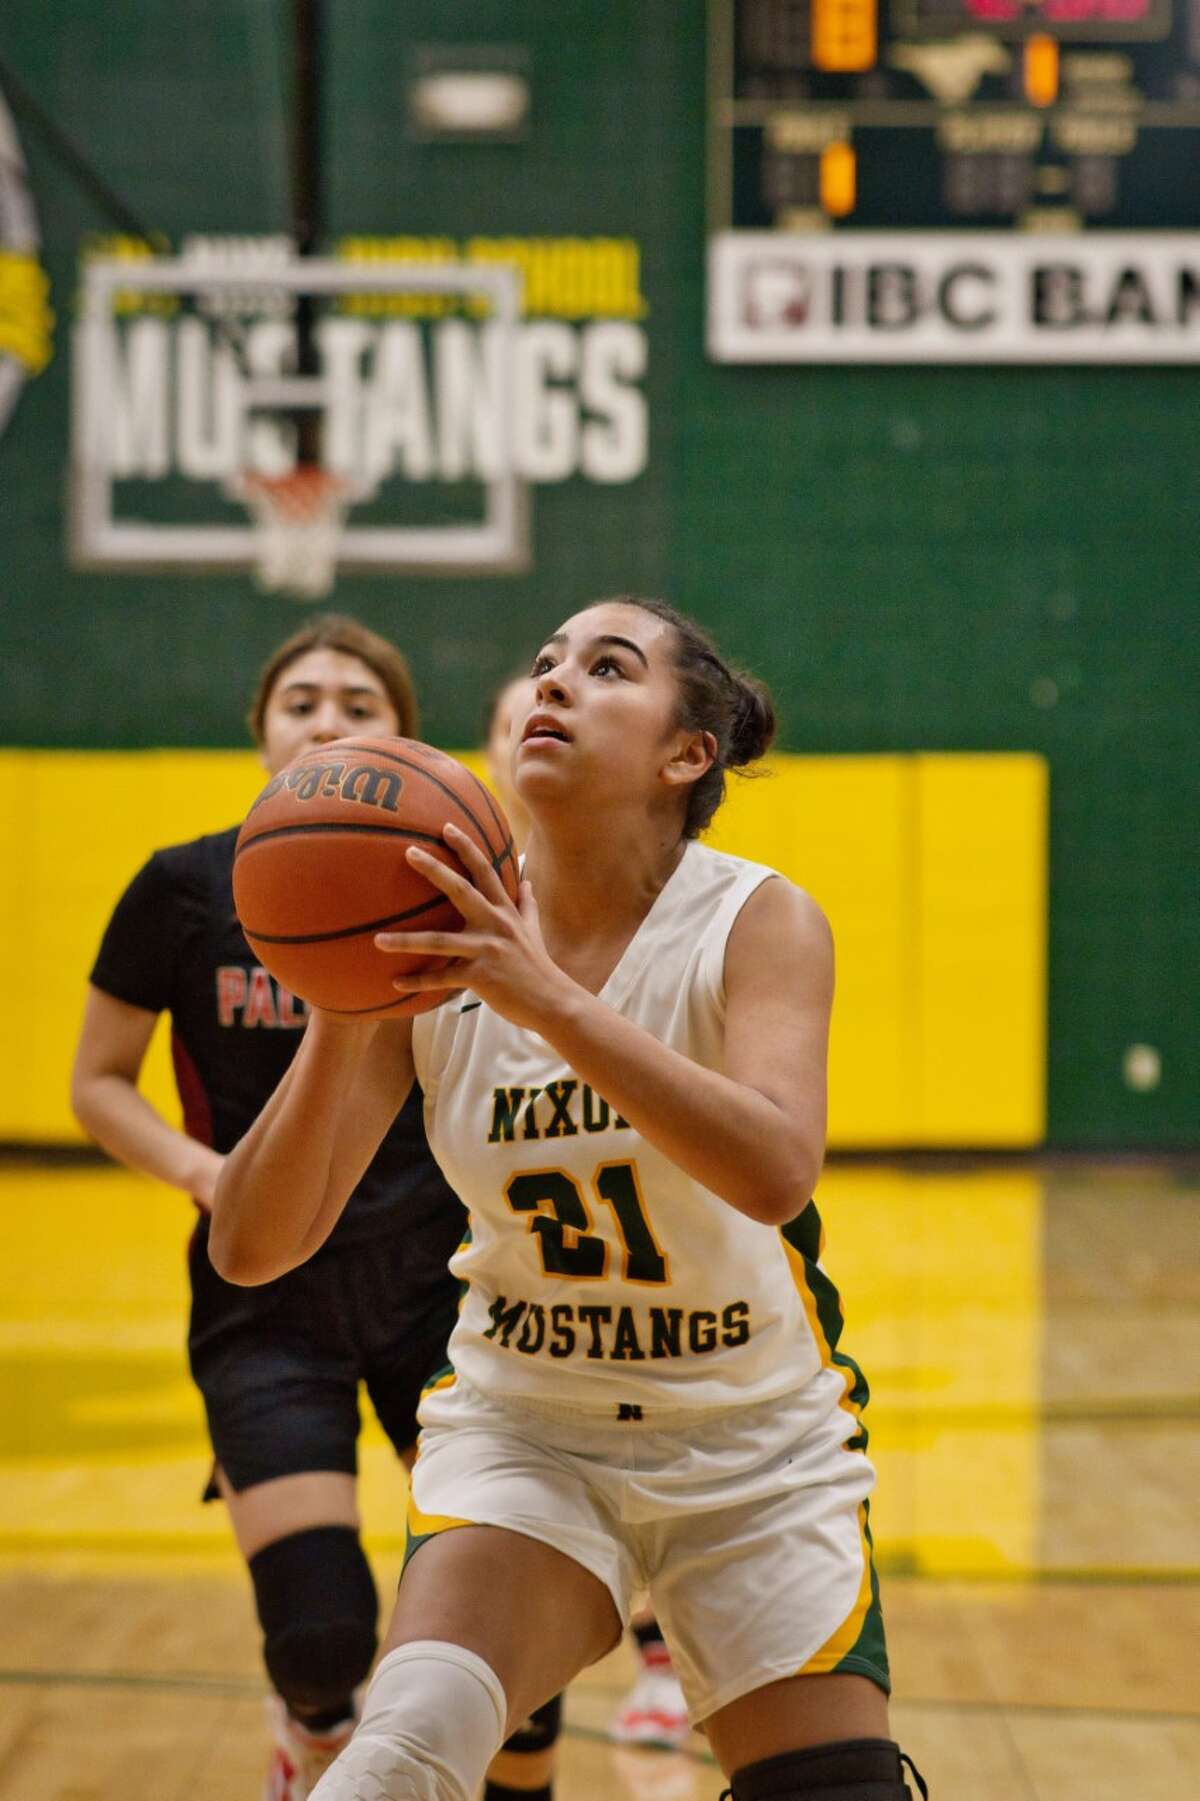 Carolina Manzo looks to lead the Nixon Lady Mustangs to a district title this season.